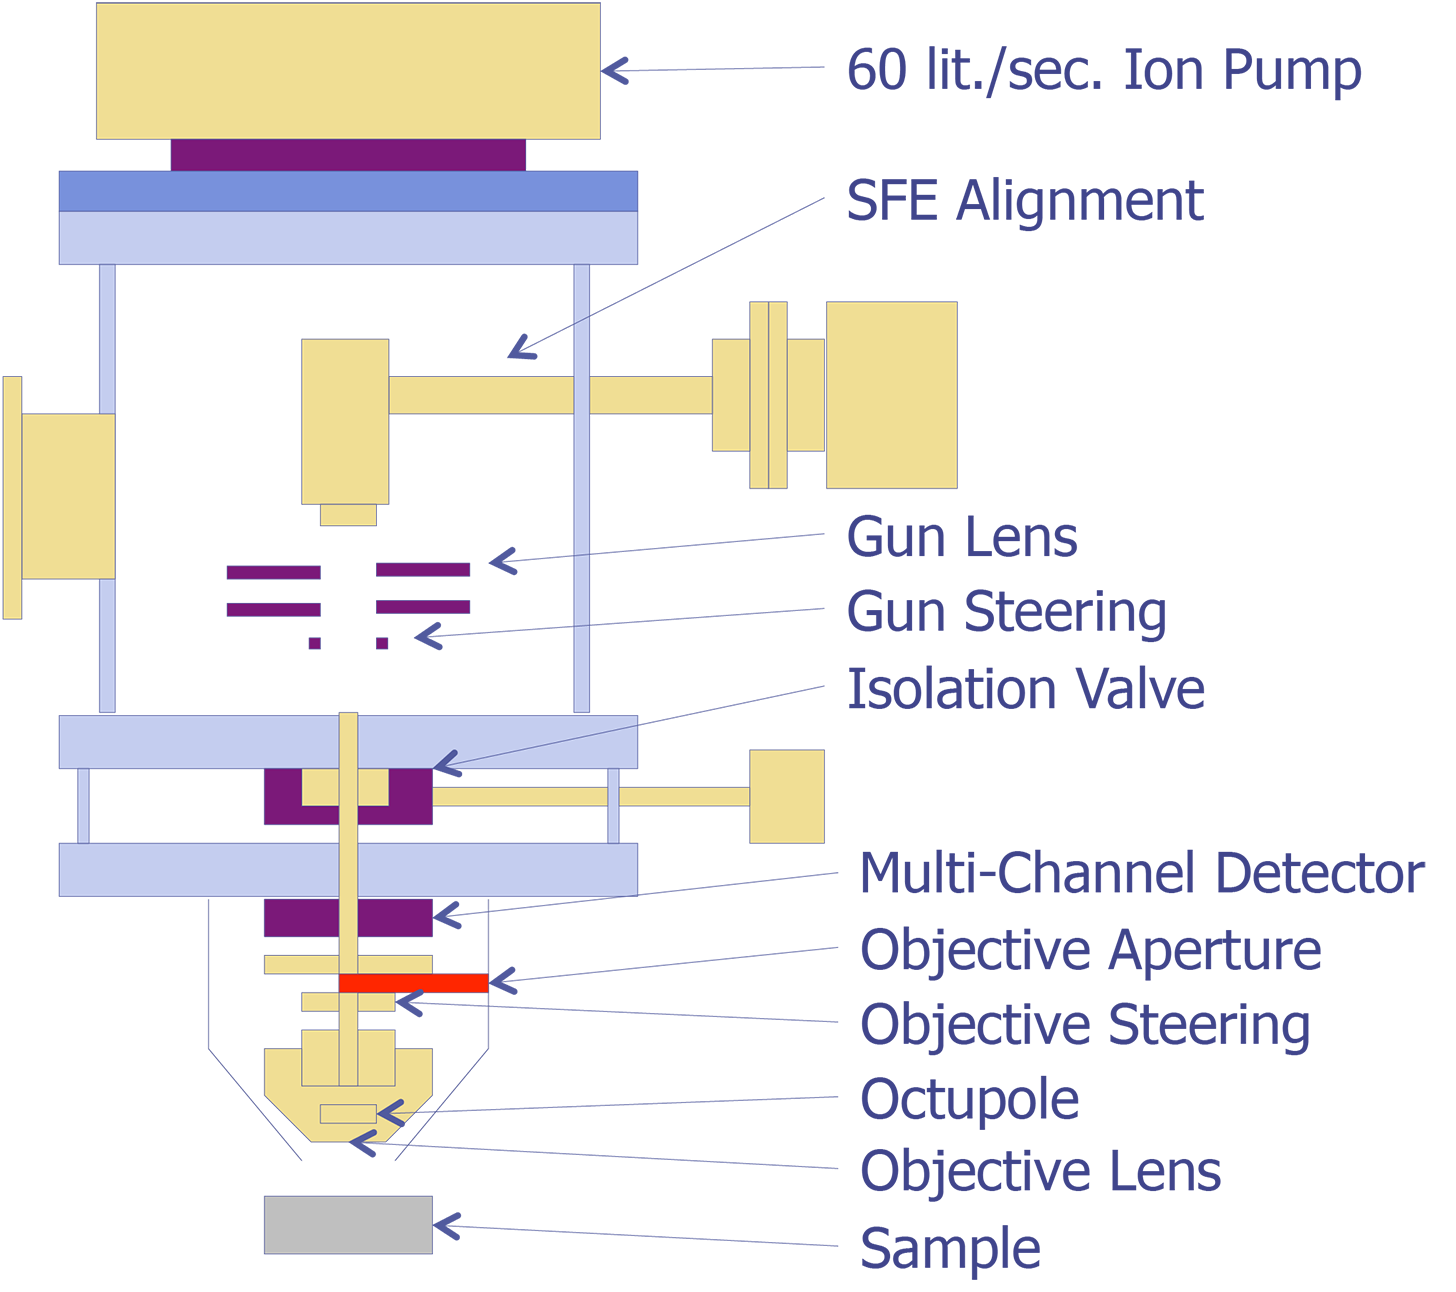 Field emission electron gun for an Auger system (after Harris).